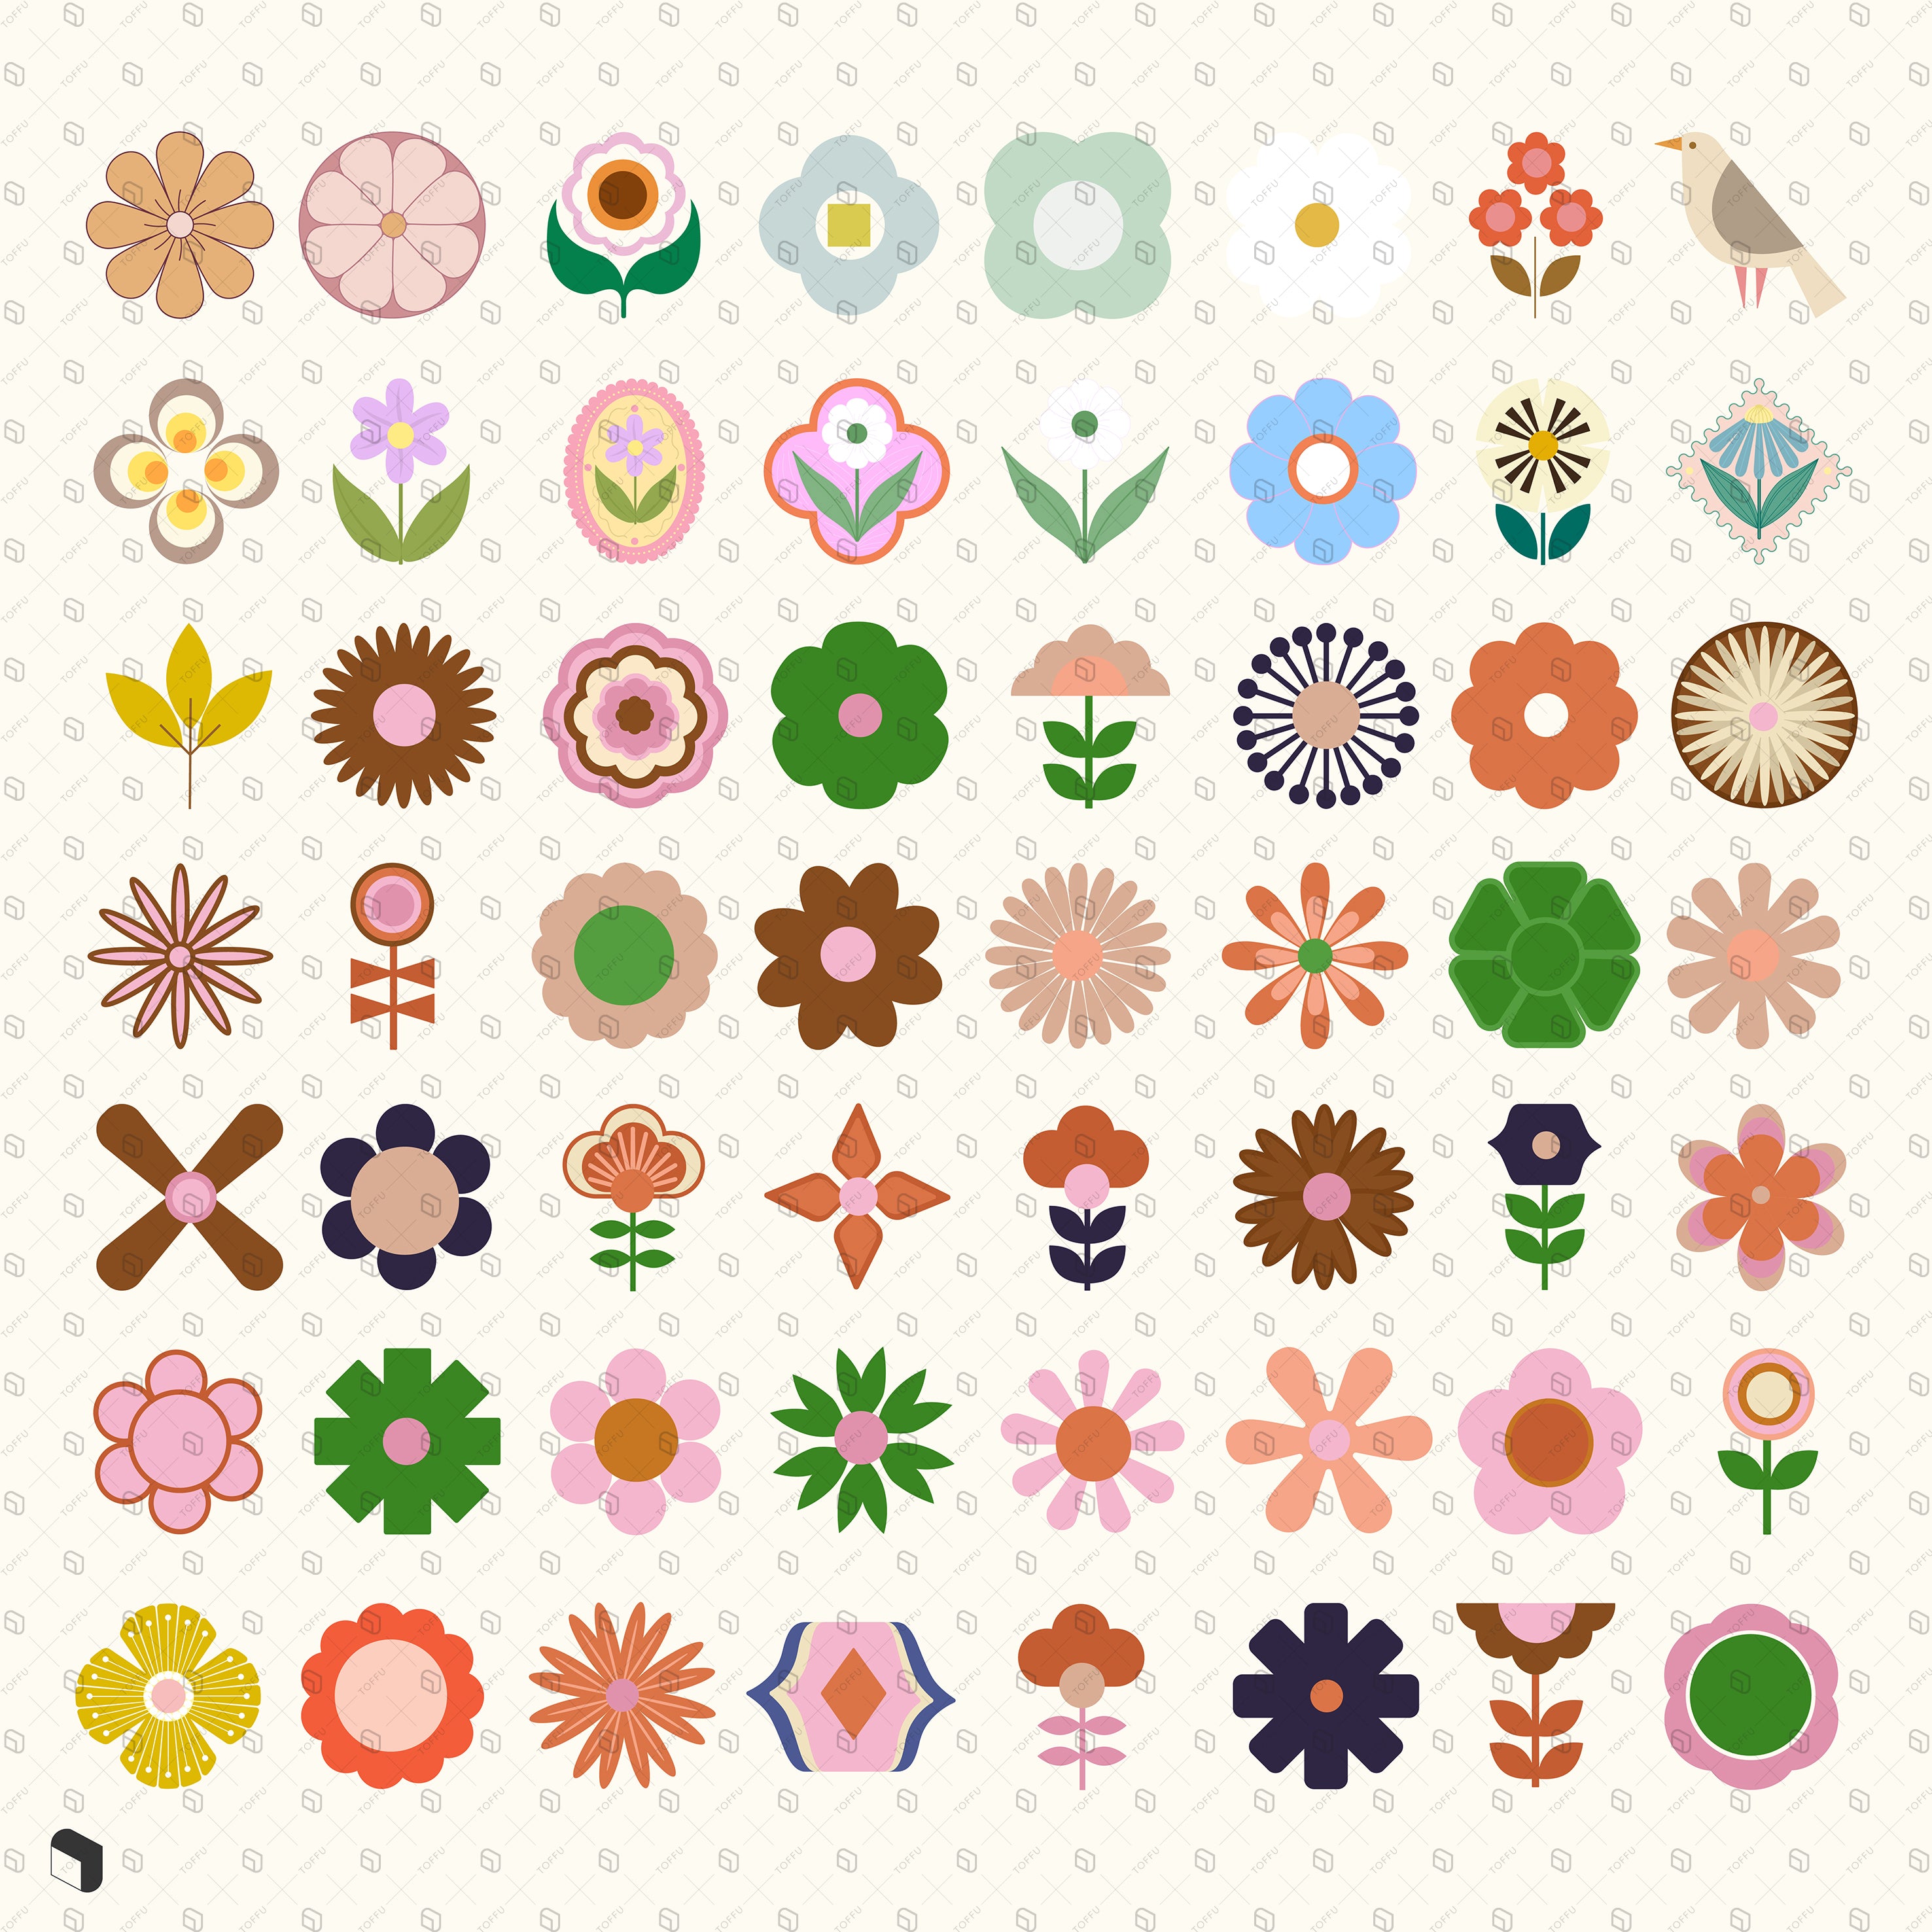 Swatch Retro Flower Patterns & Flat Icons PNG - Toffu Co